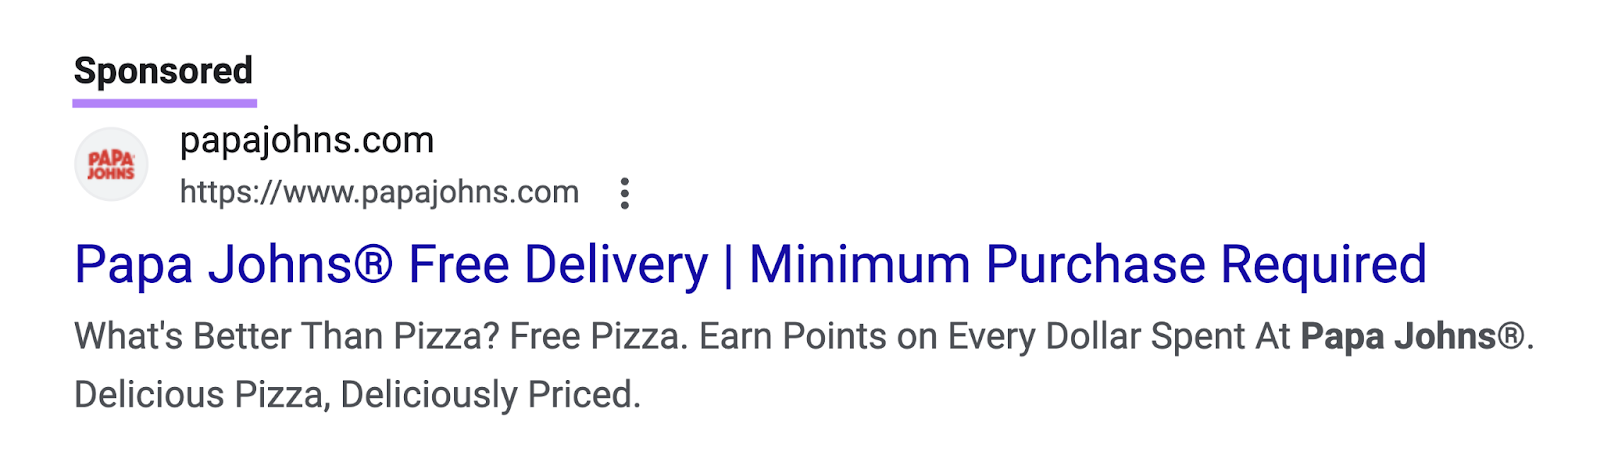 A paid ad for Papa Johns on Google SERP